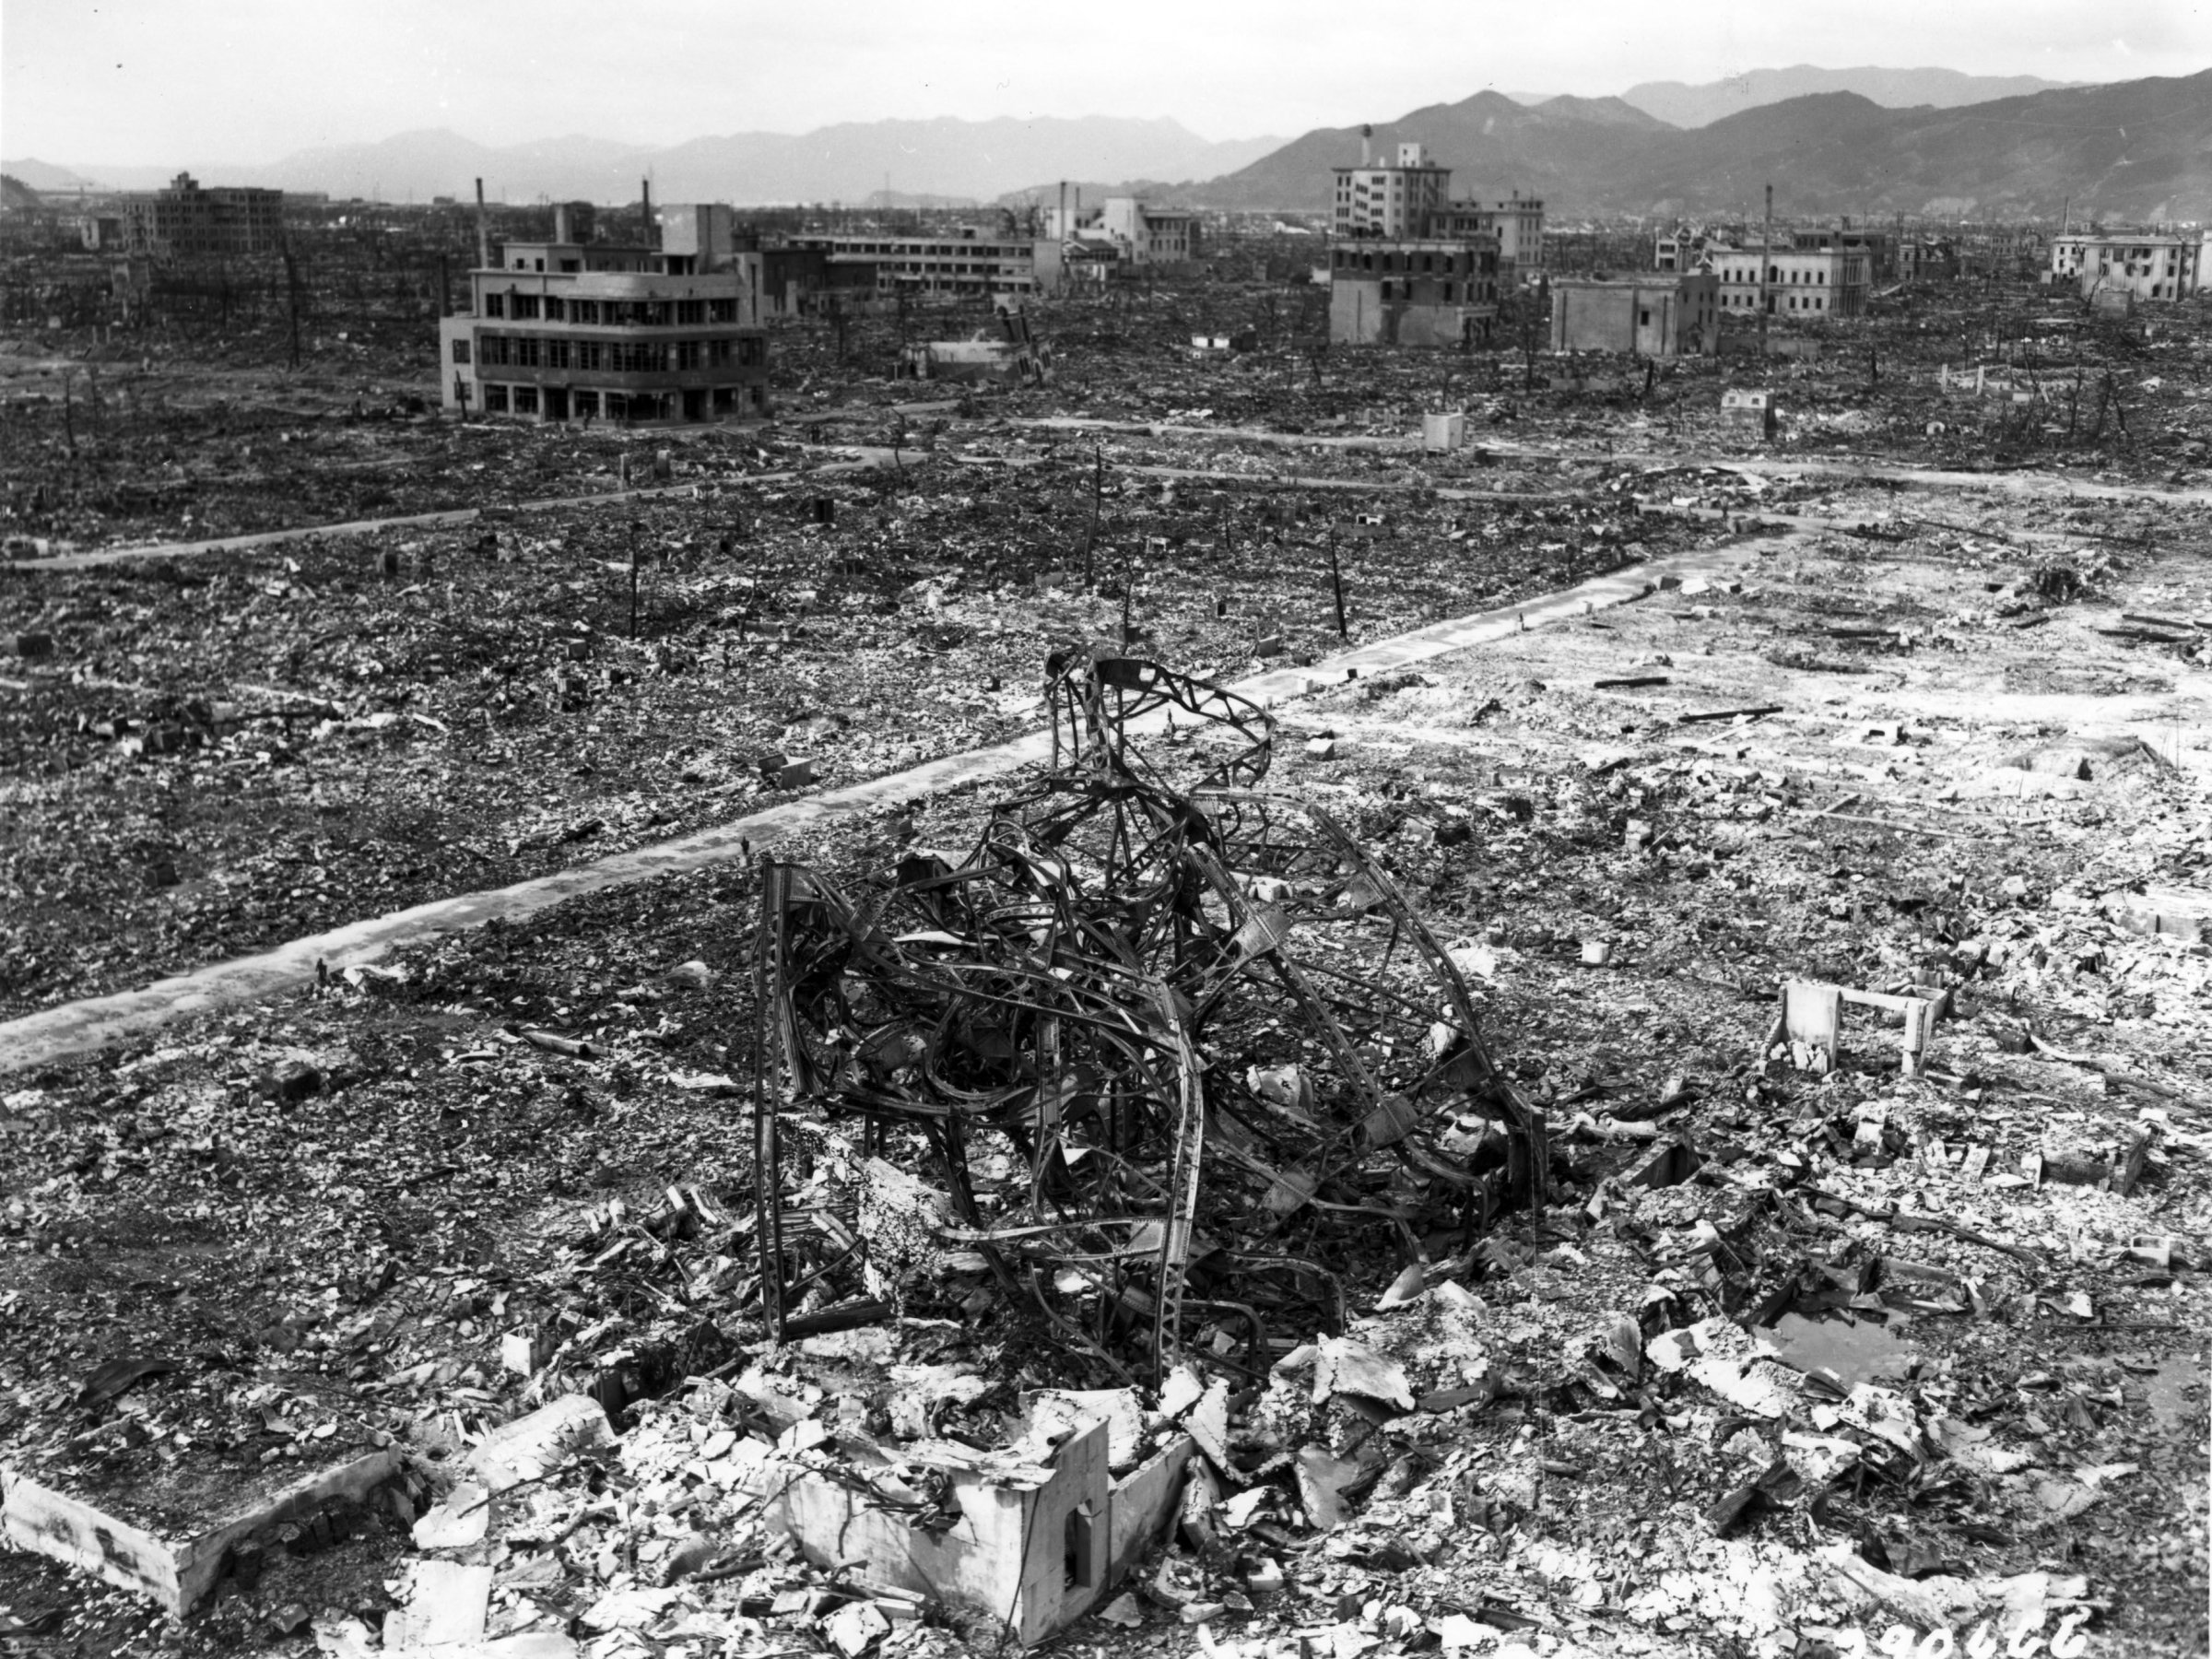 The aftermath of the bombing at Nagasaki in 1945.